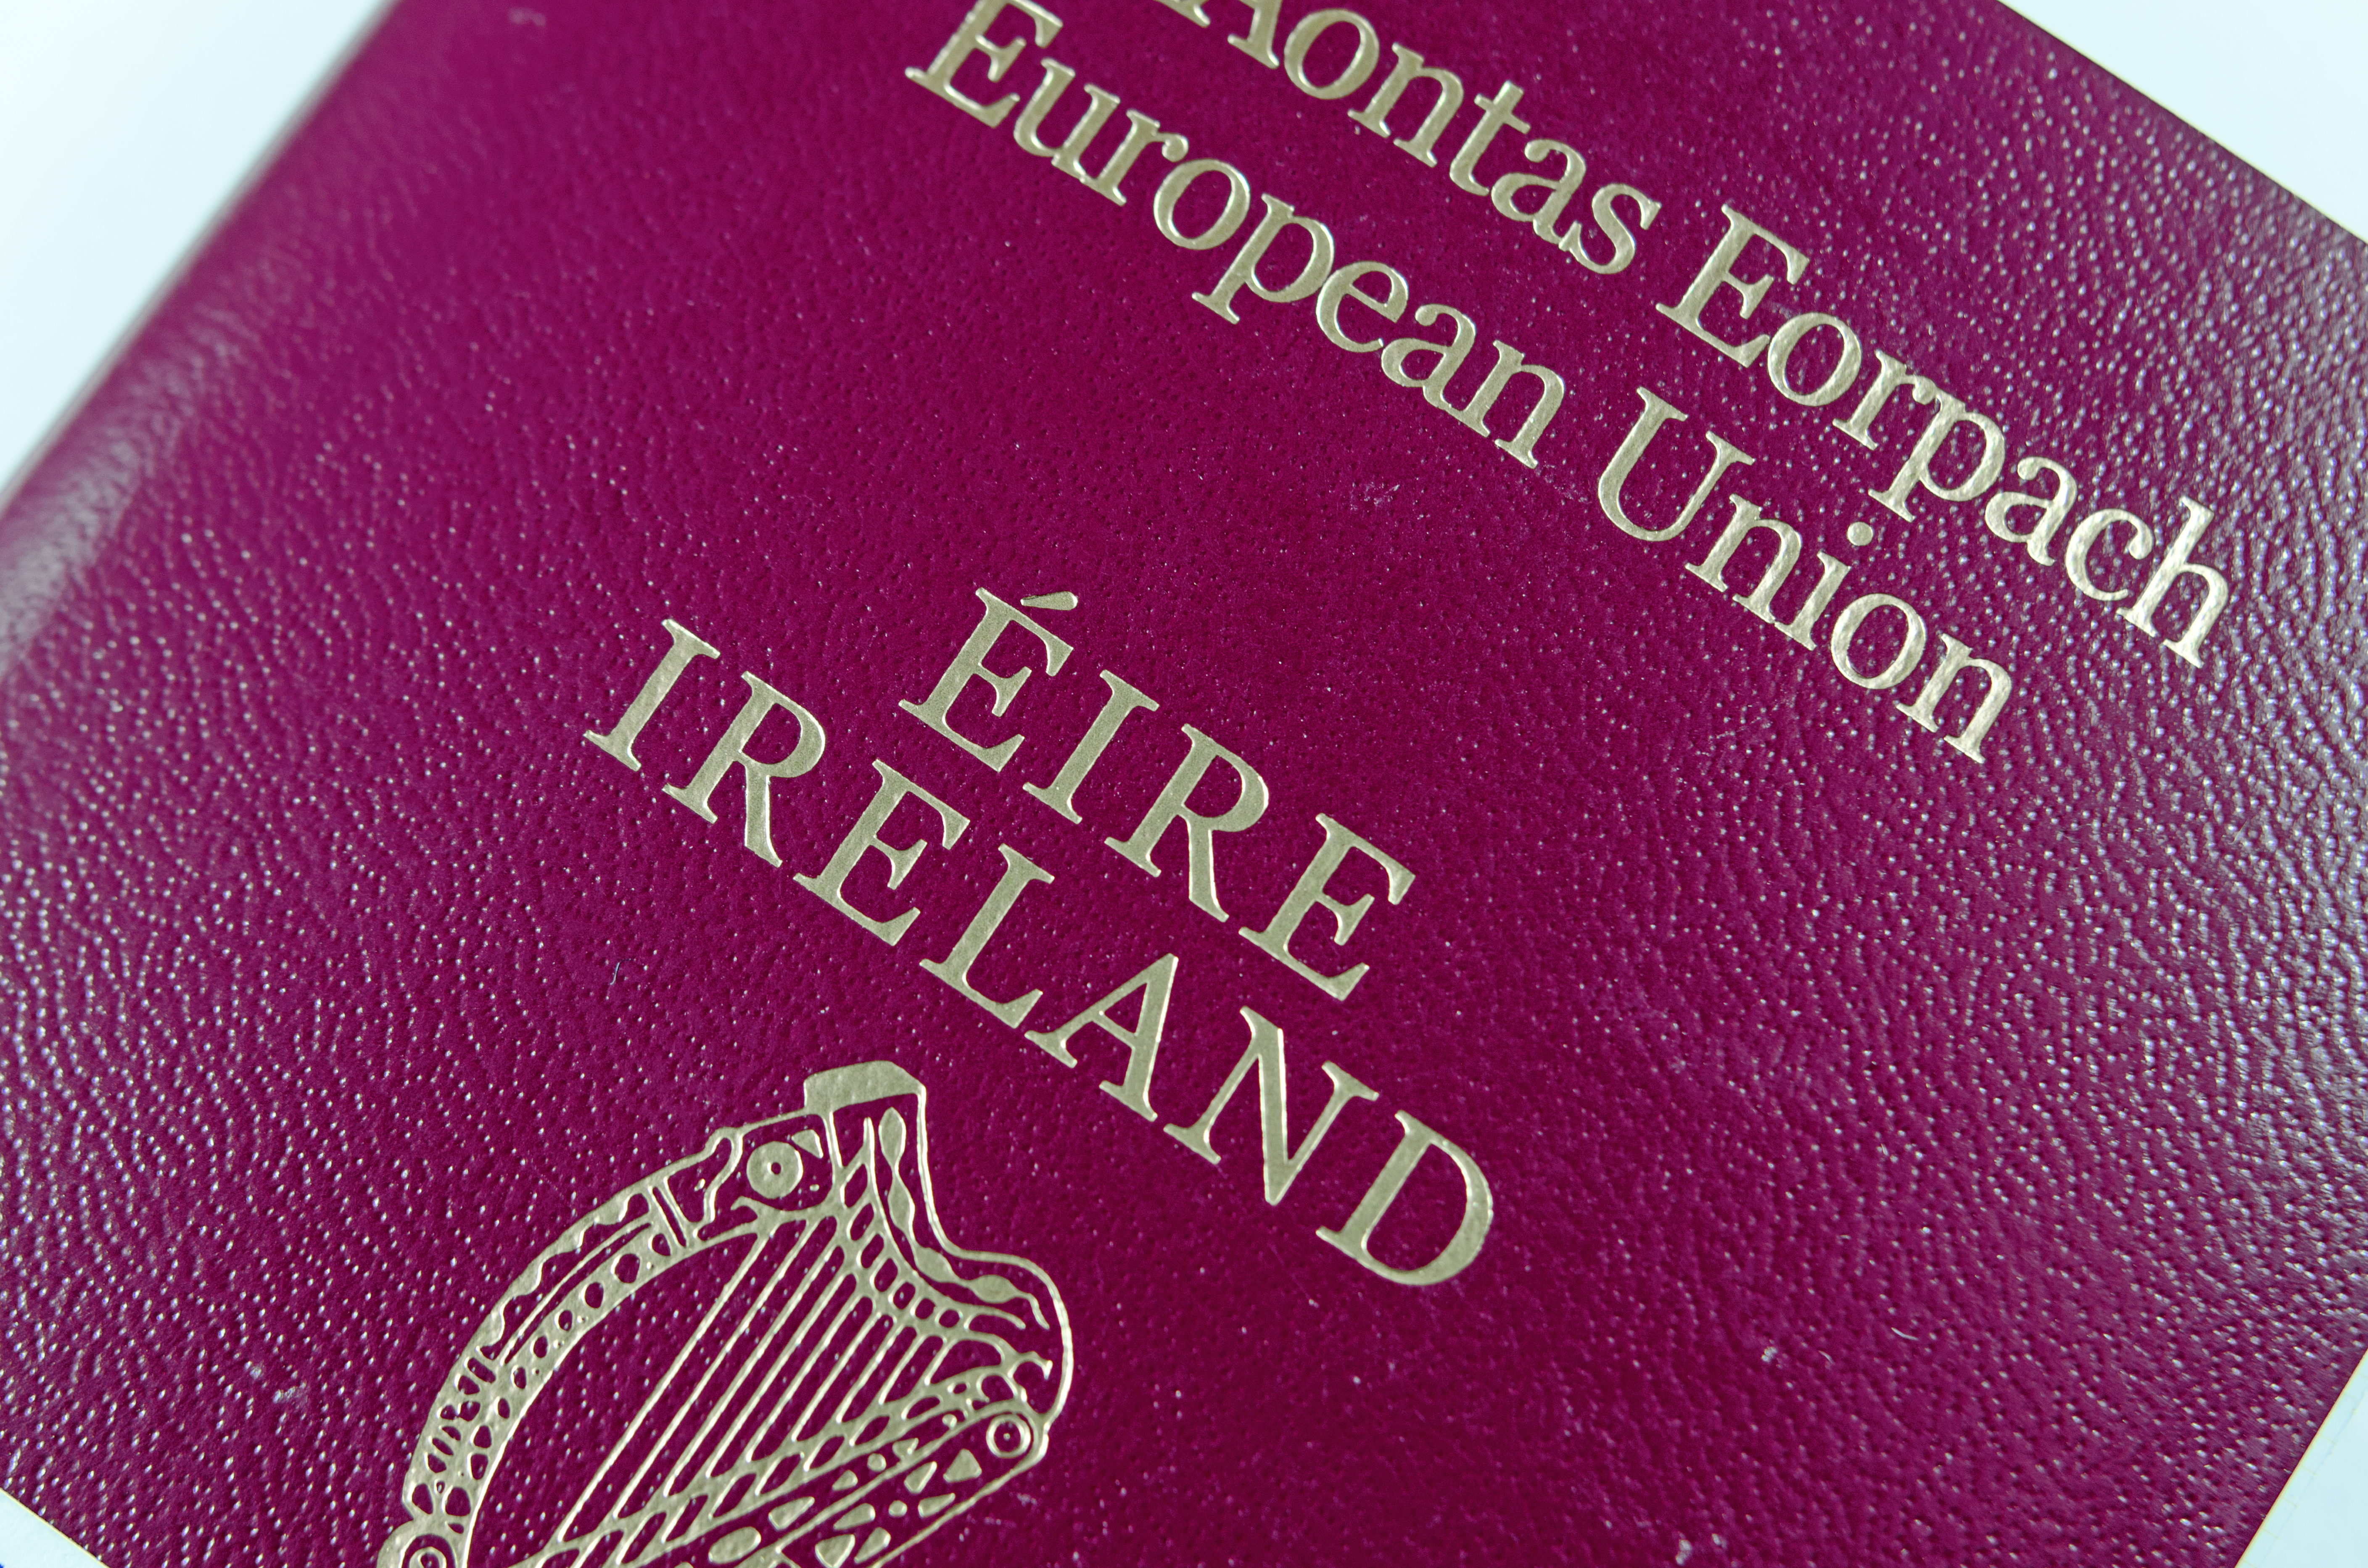 Opinion: Parents with different surnames are being asked to carry their child’s birth cert to travel but is it legal?